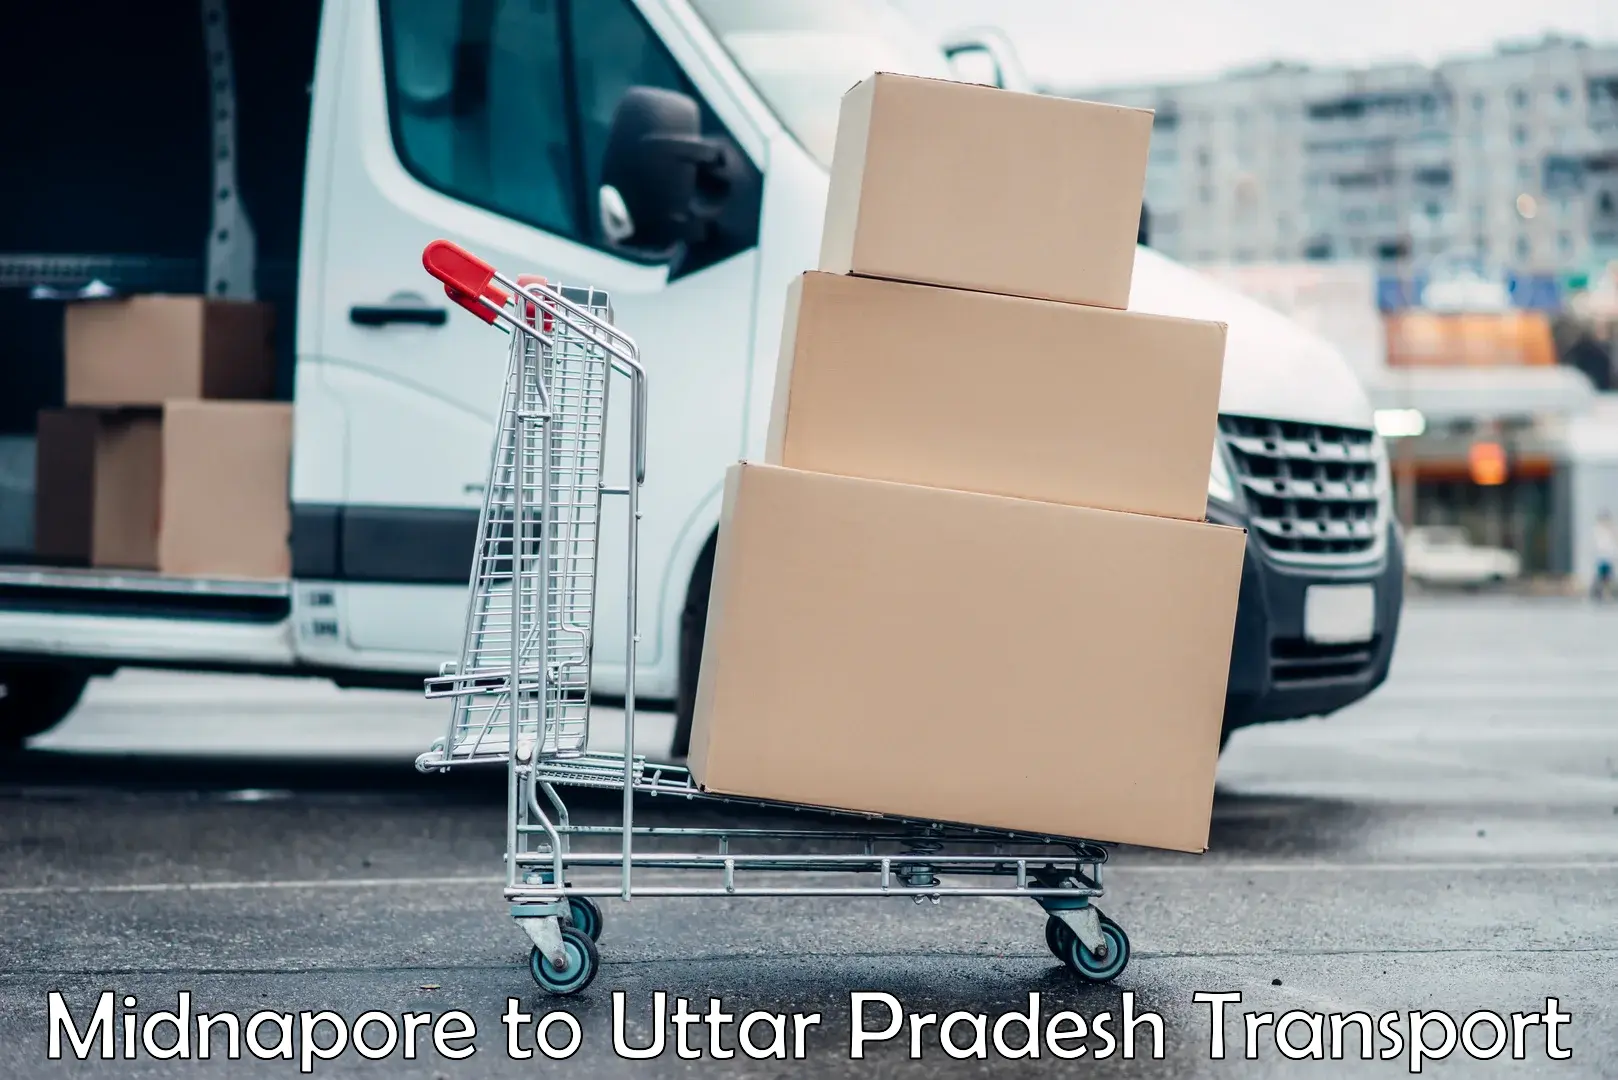 Furniture transport service Midnapore to Baghpat